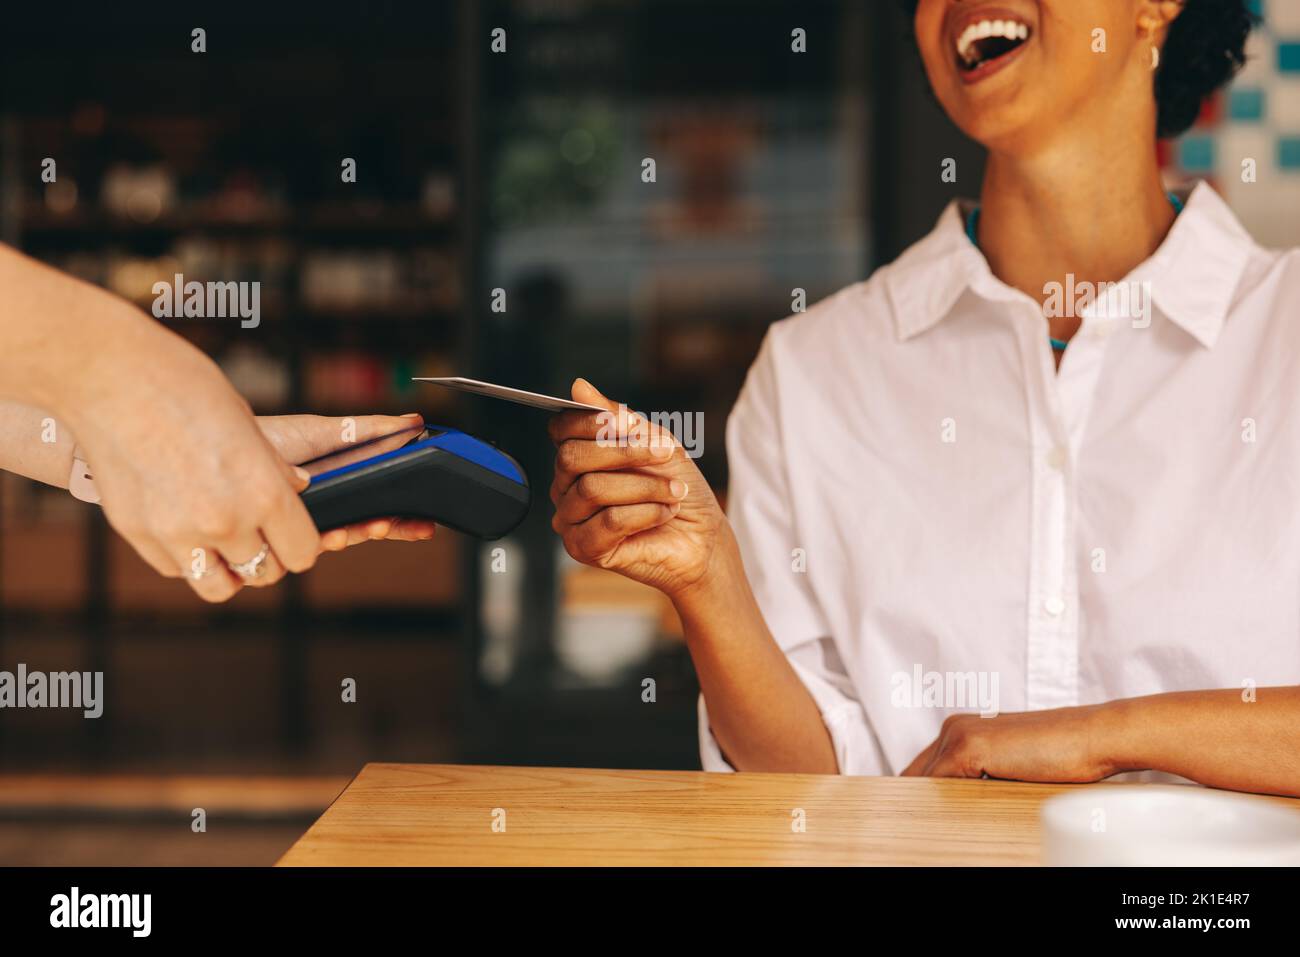 Happy female customer scanning her credit card on a card machine to pay her bill in a cafe. Cheerful woman doing a cashless and contactless transactio Stock Photo